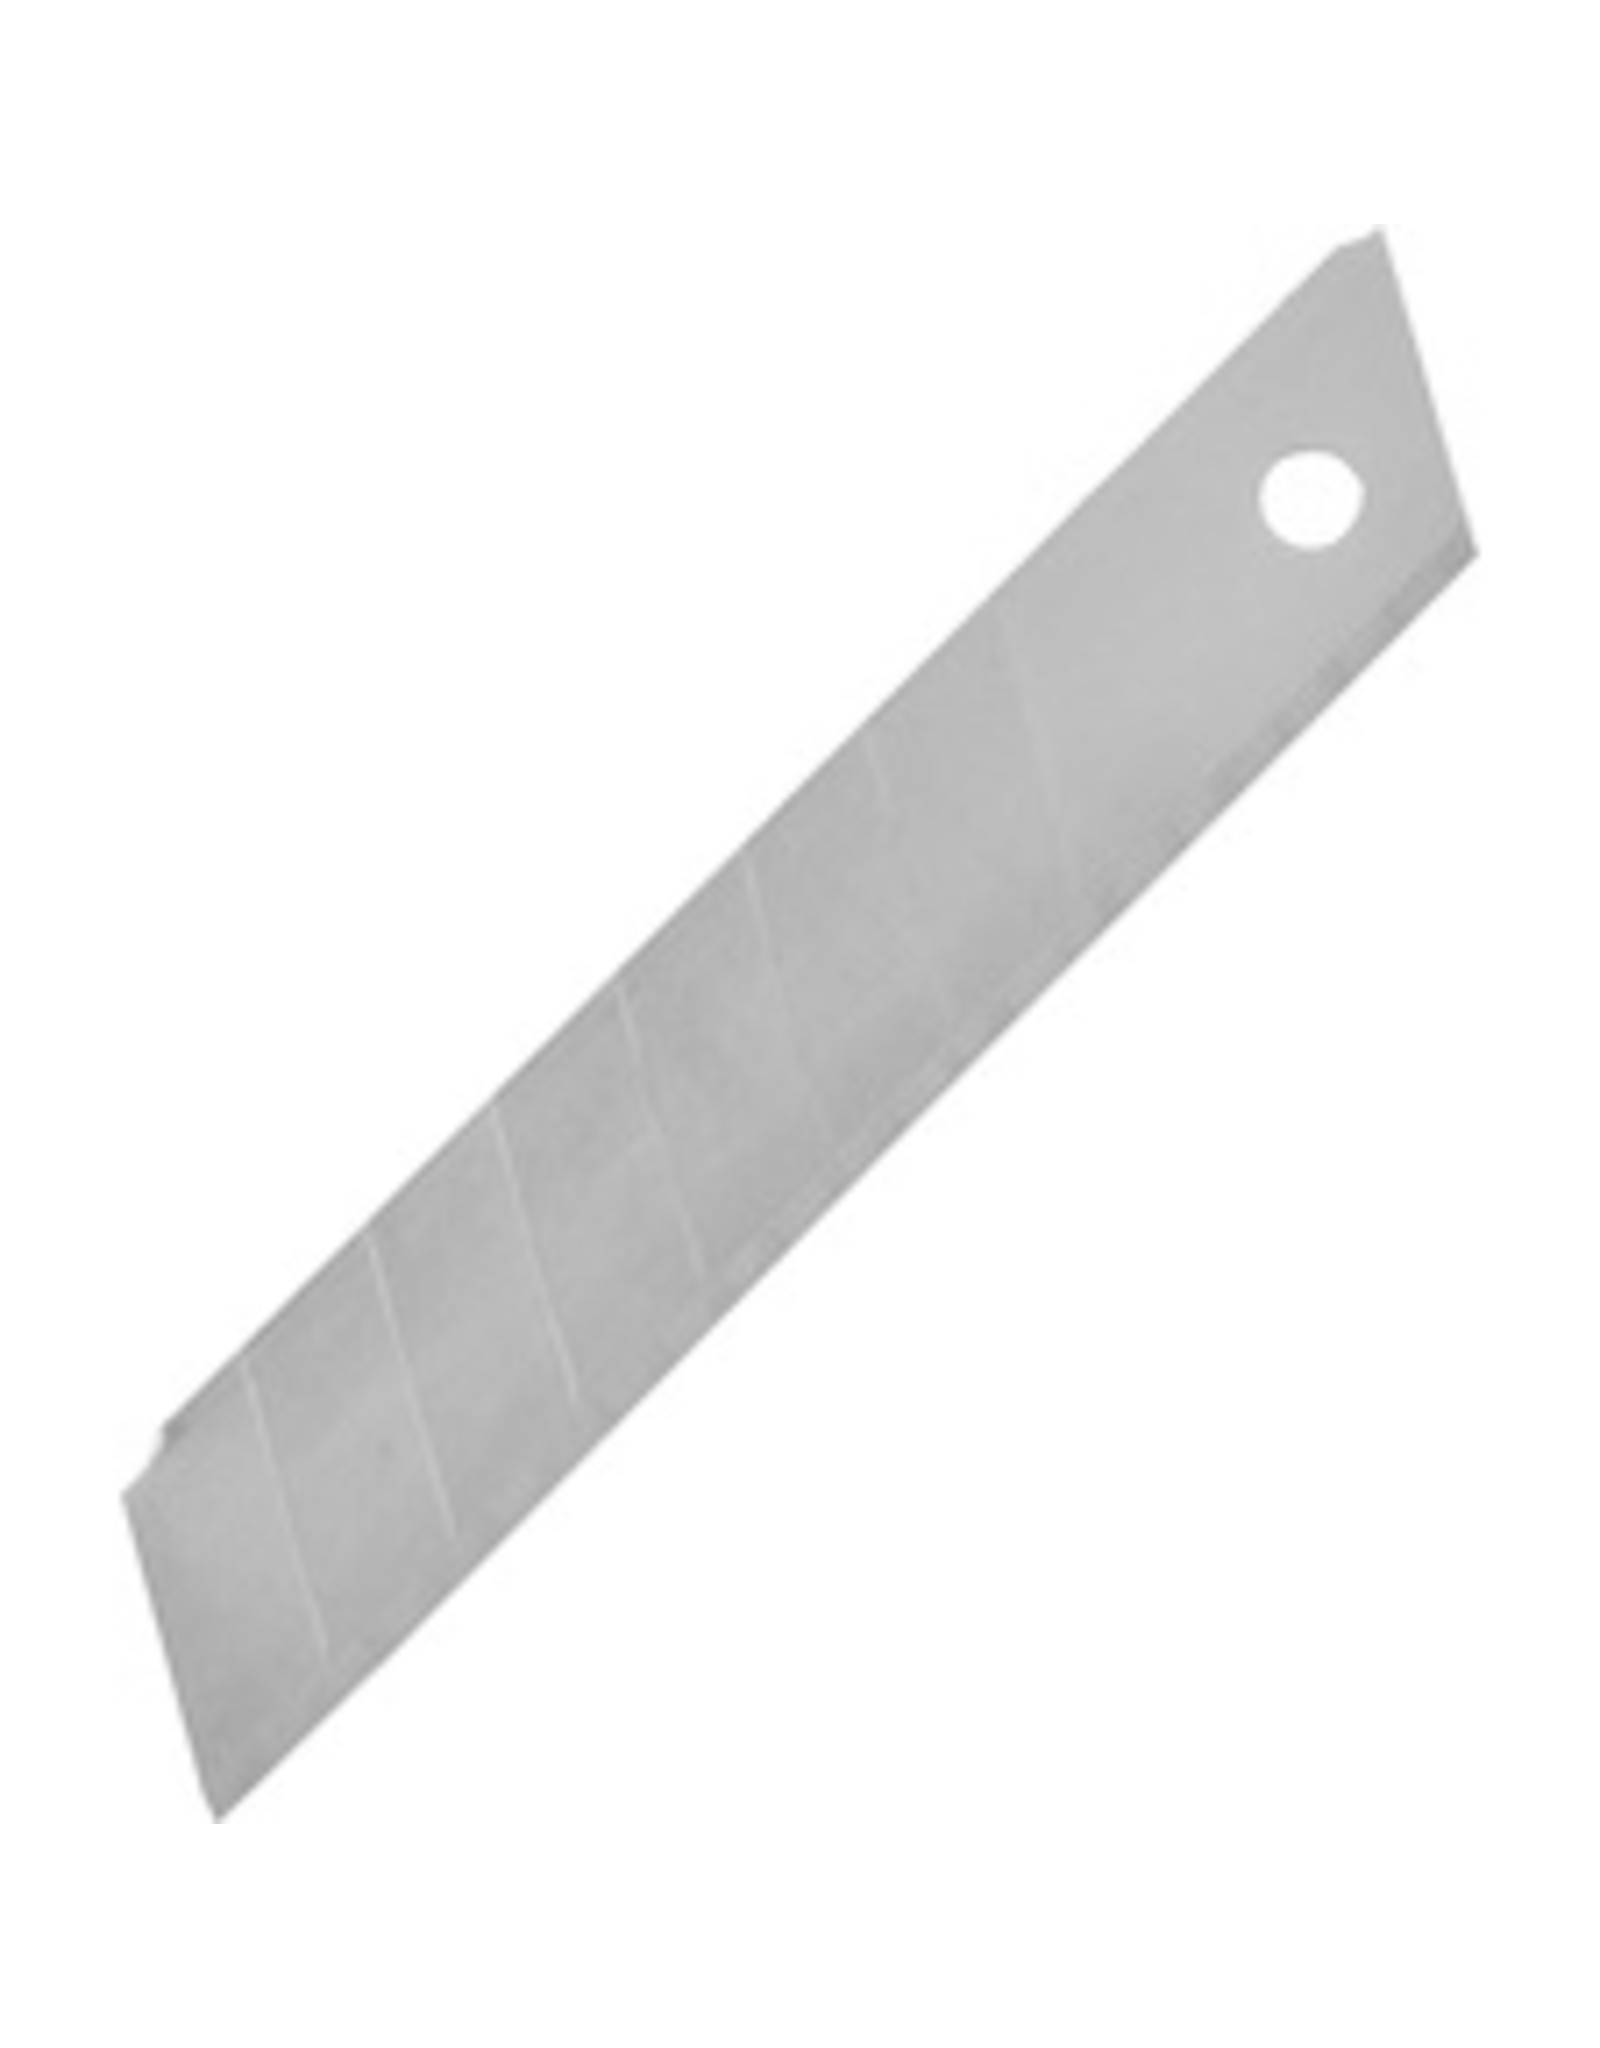 BLADE,REPLACEMENT,SNAP,18MM